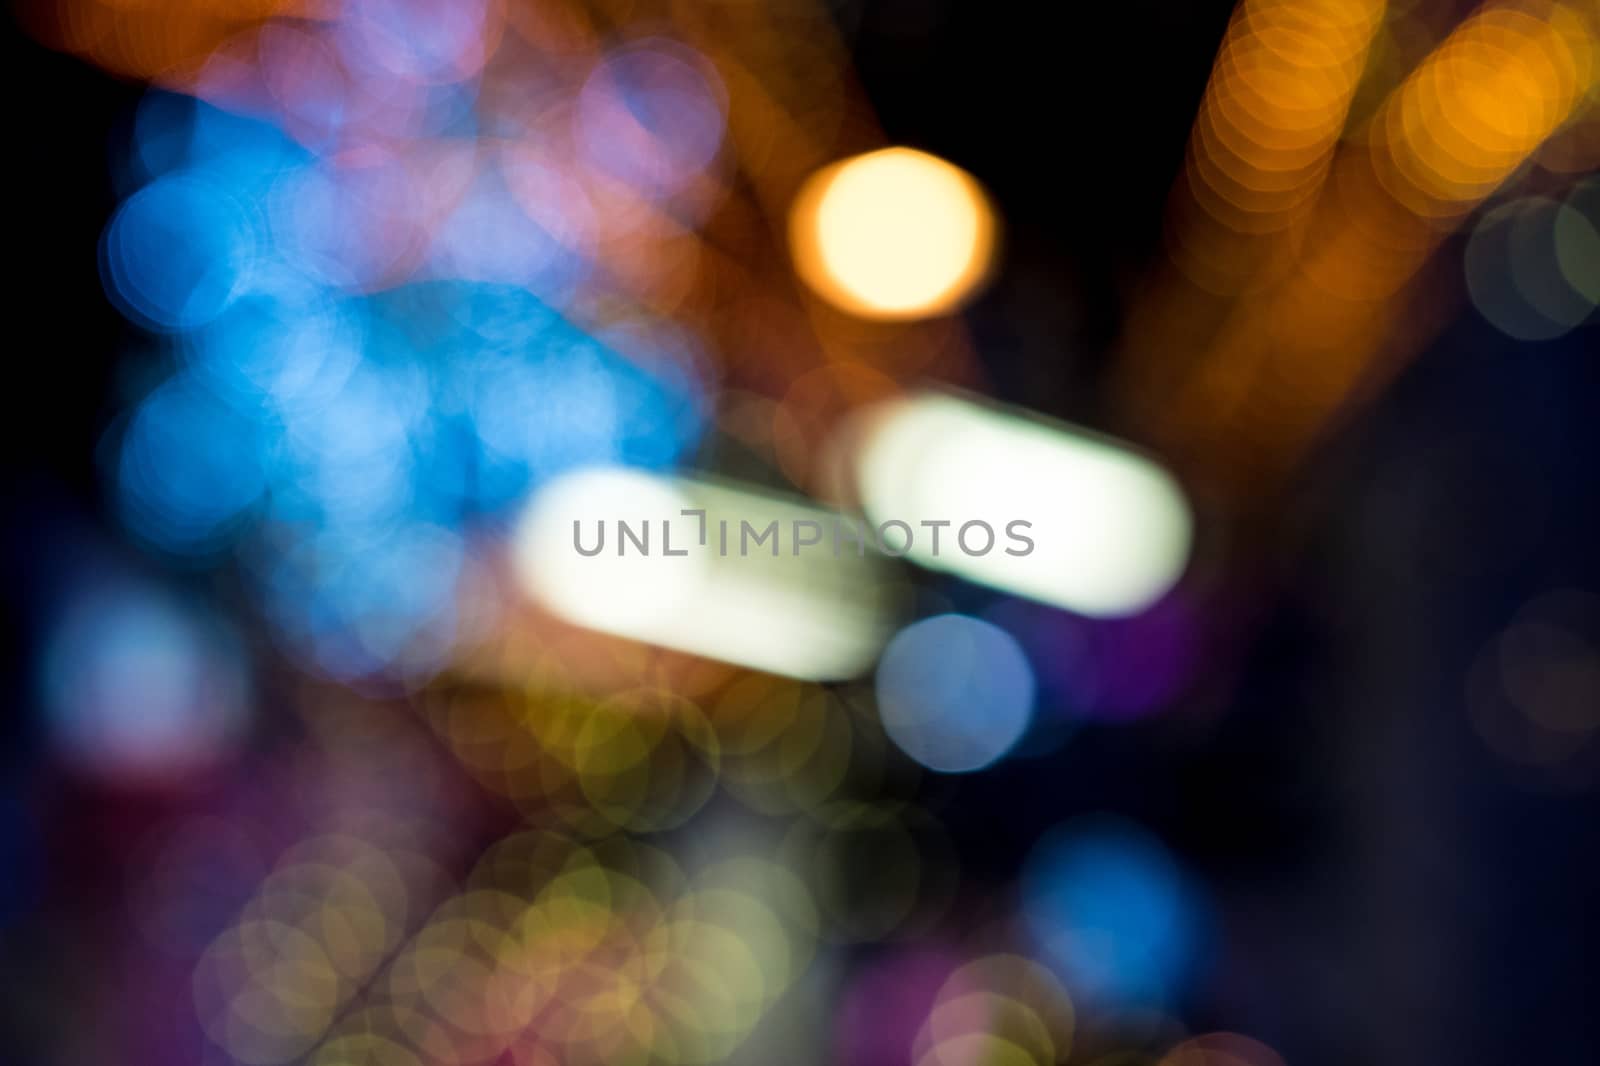 Abstract lighting bokeh background by pixbox77